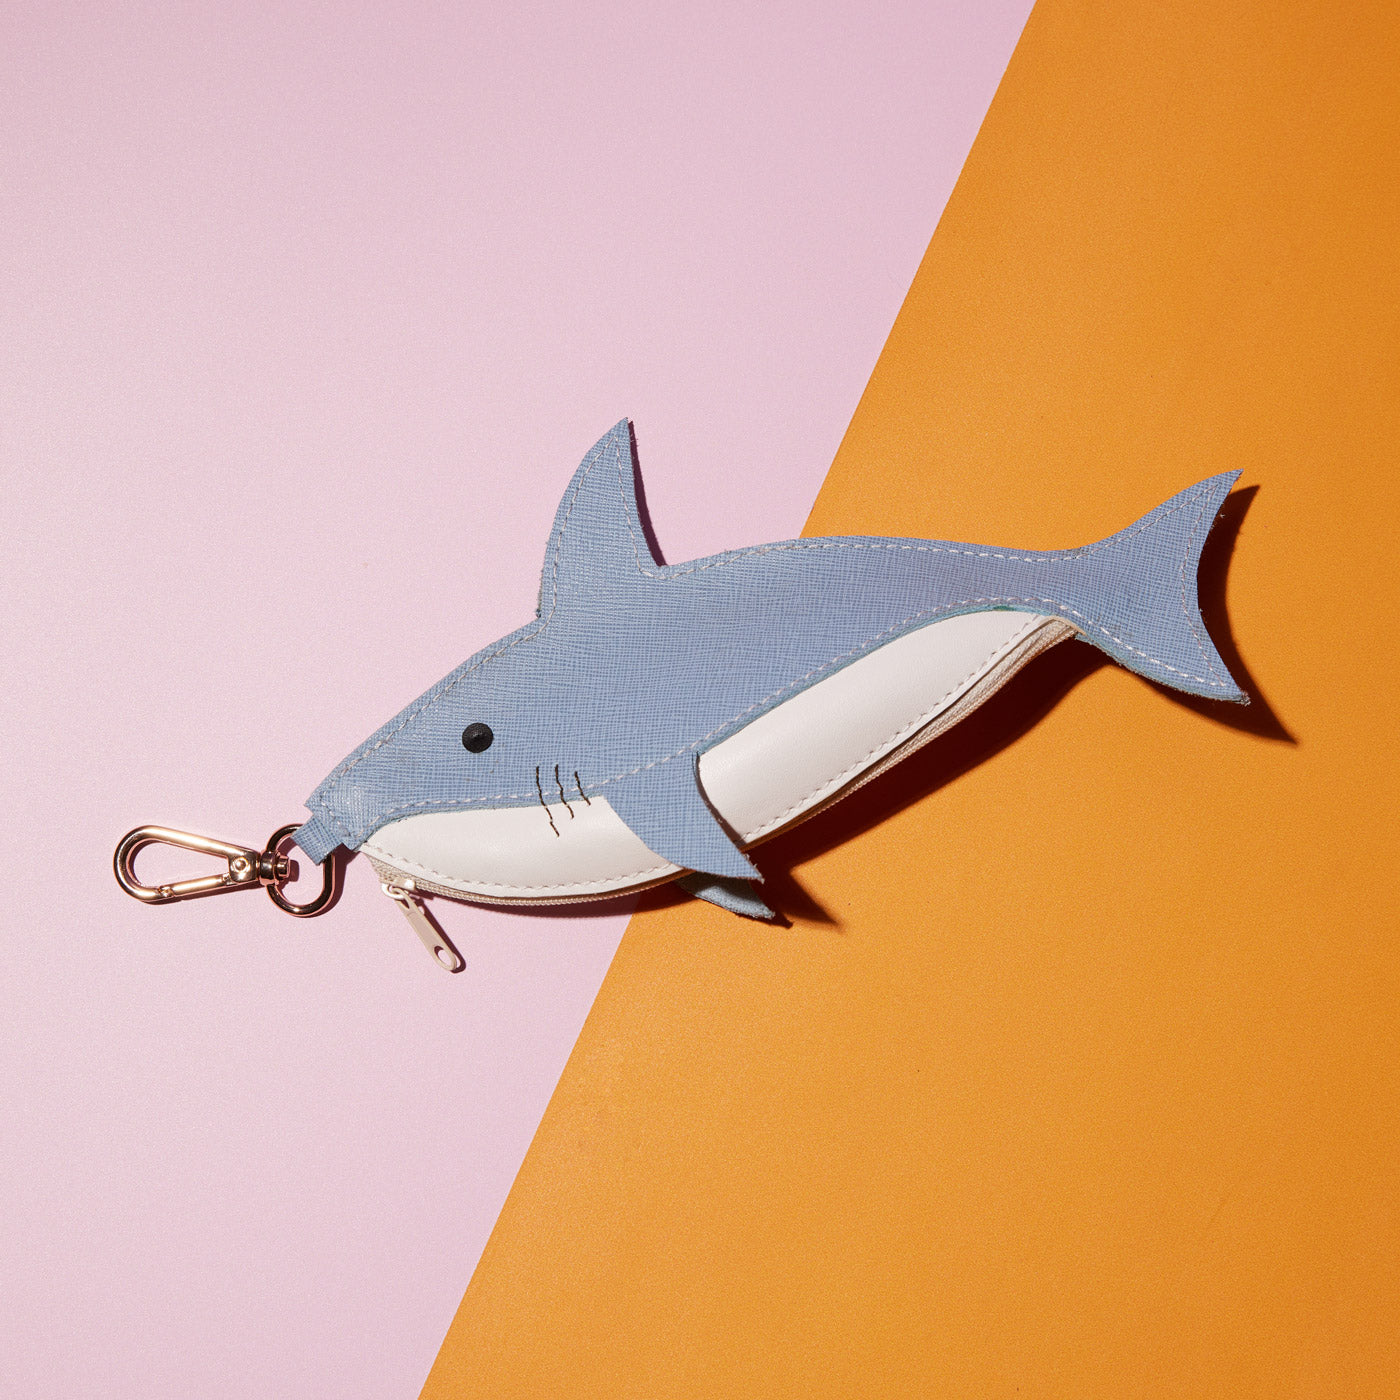 Wicker Darling's Caesar the shark coin purse on a colourful background